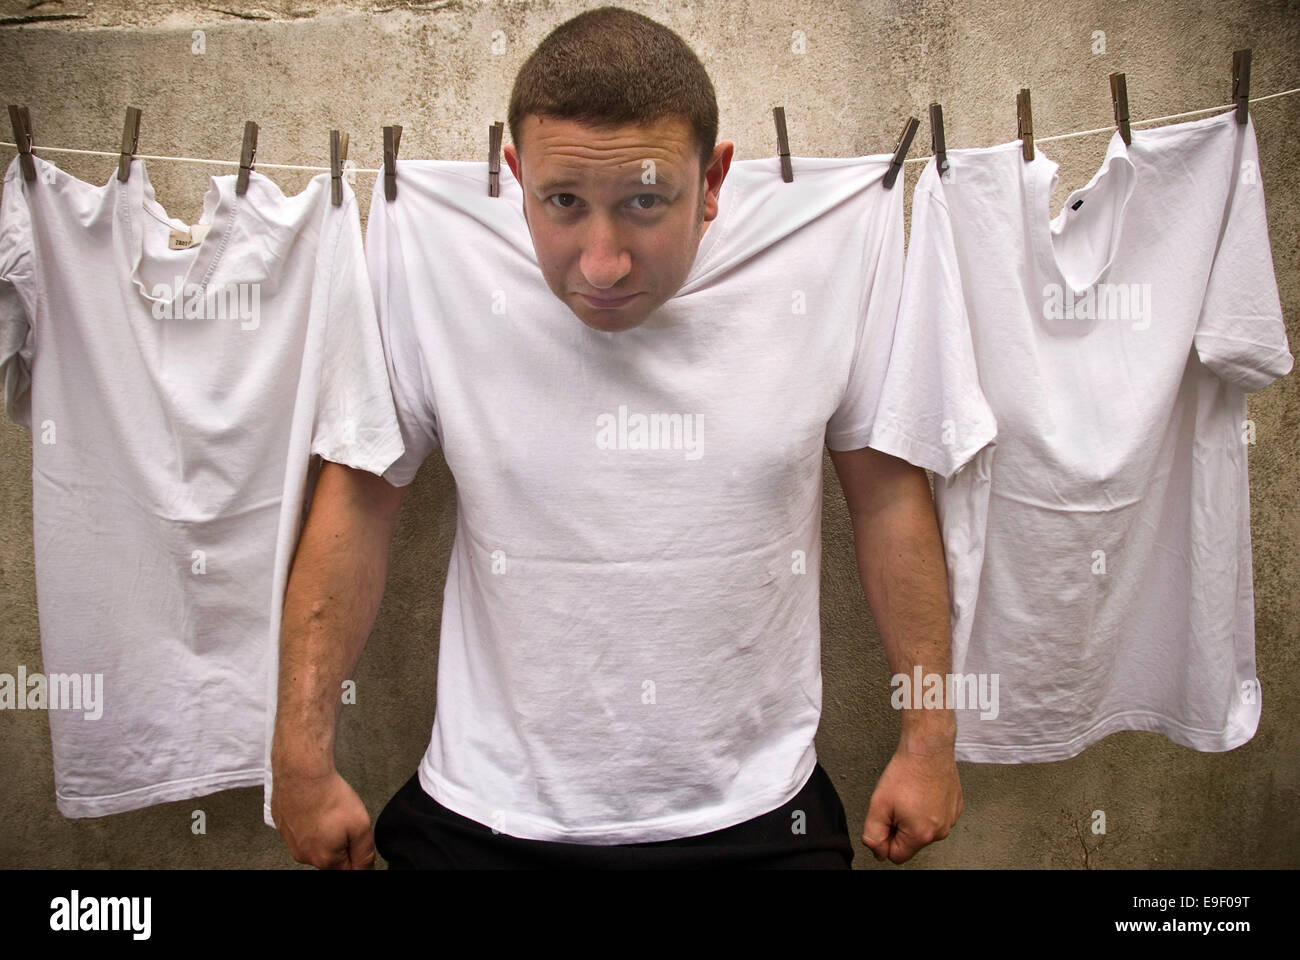 a man pinned on a washing line with white t-shirts Stock Photo